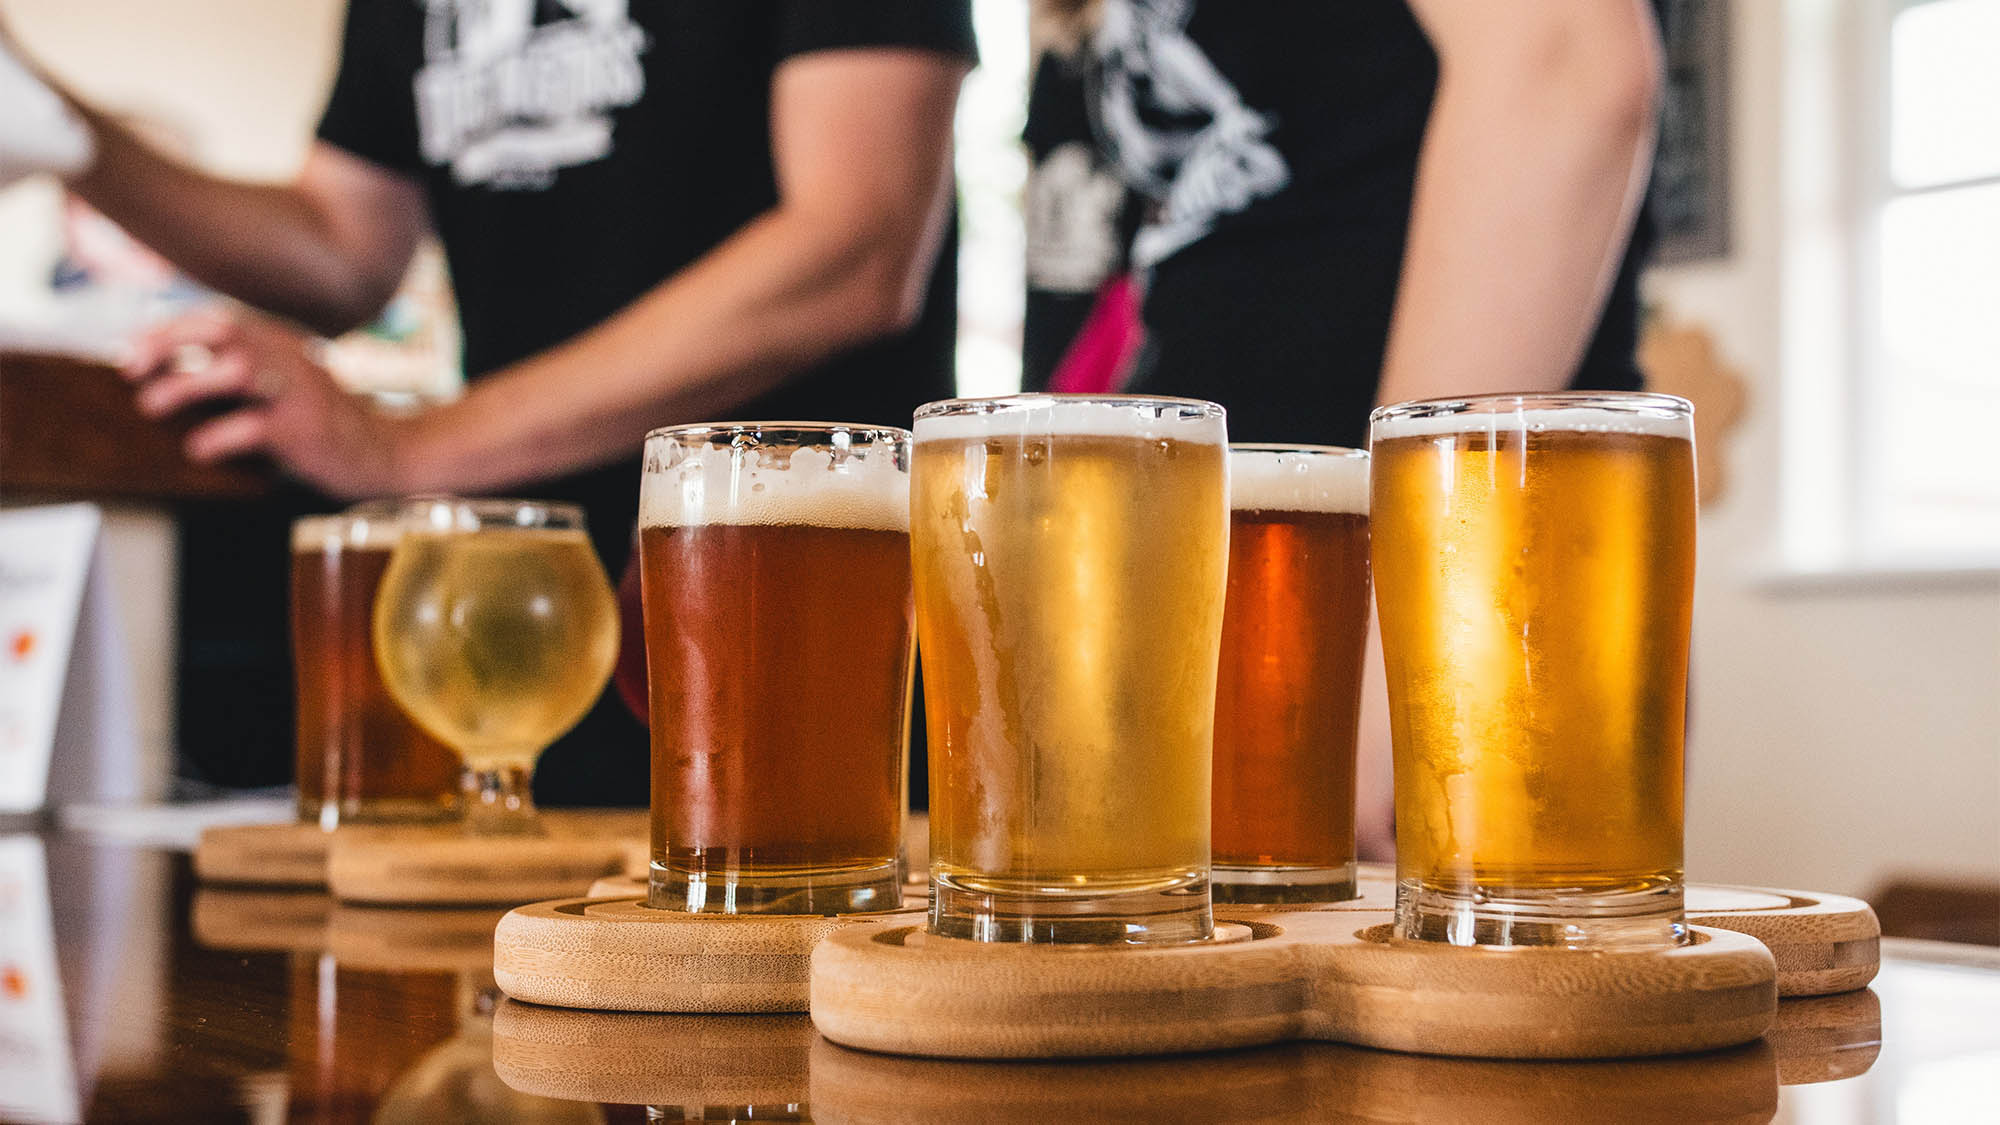 Flight of beers in different glasses on wood coasters